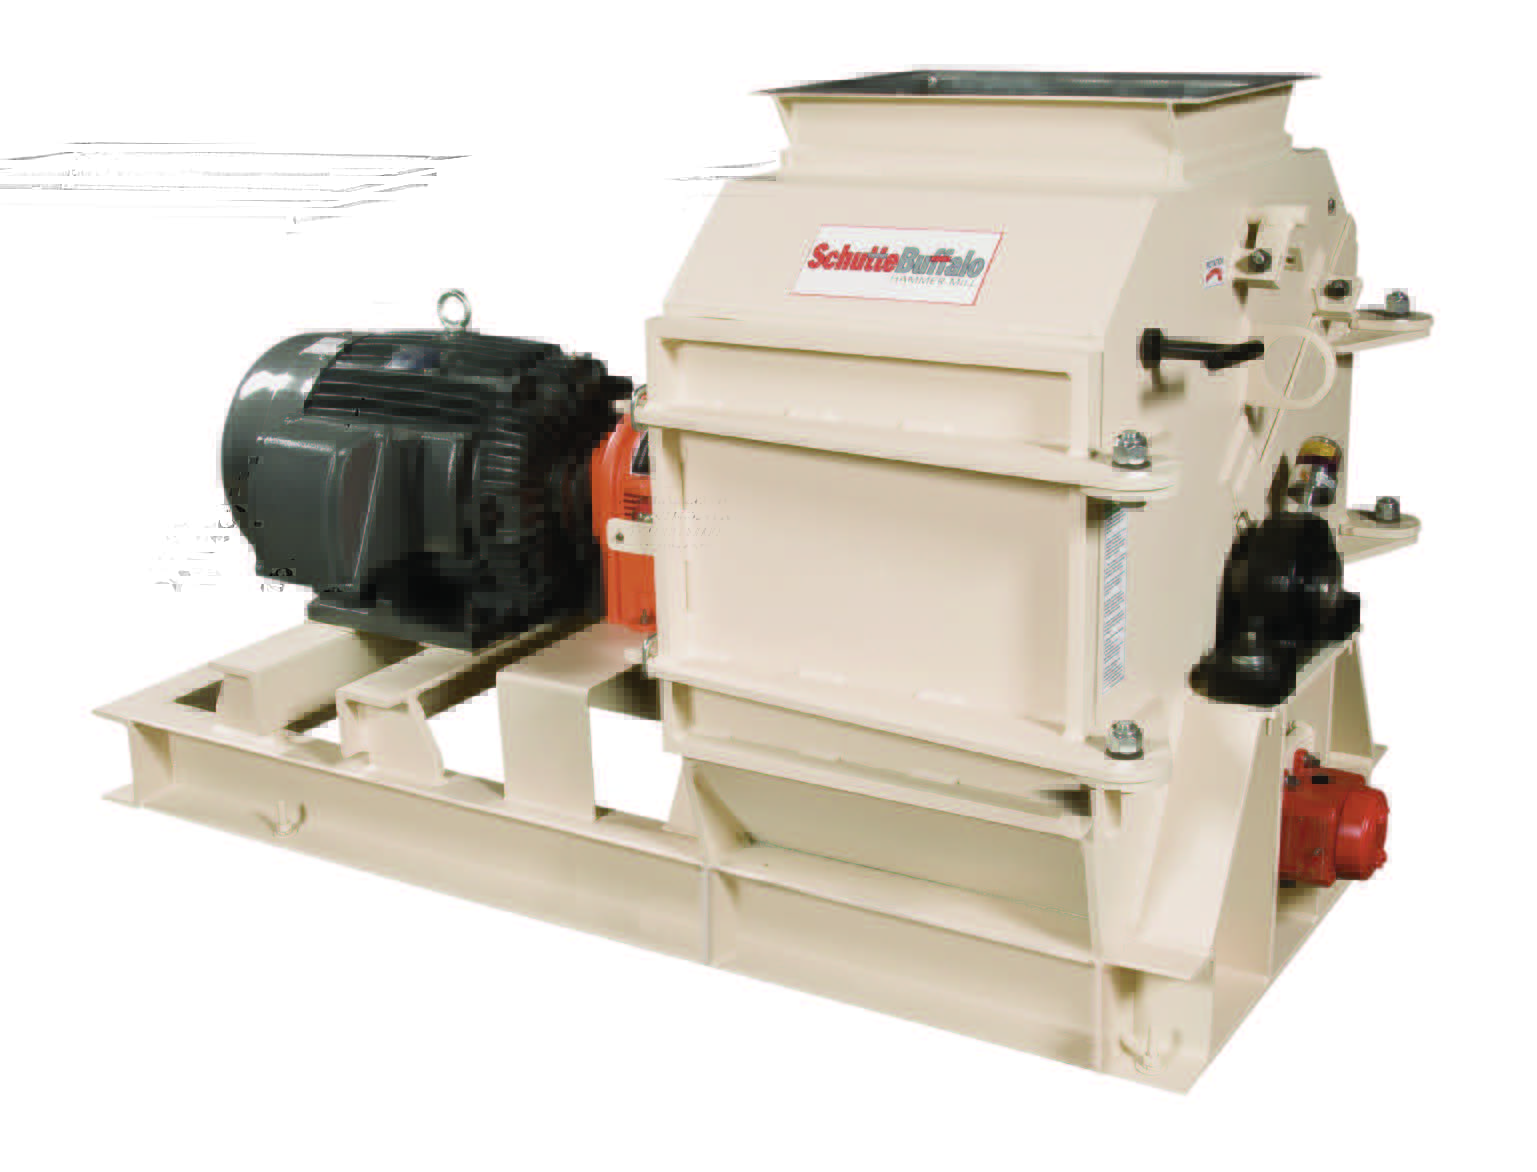 Industrial grain crusher machine with an electric motor, mounted on a metal frame, isolated on a white background.